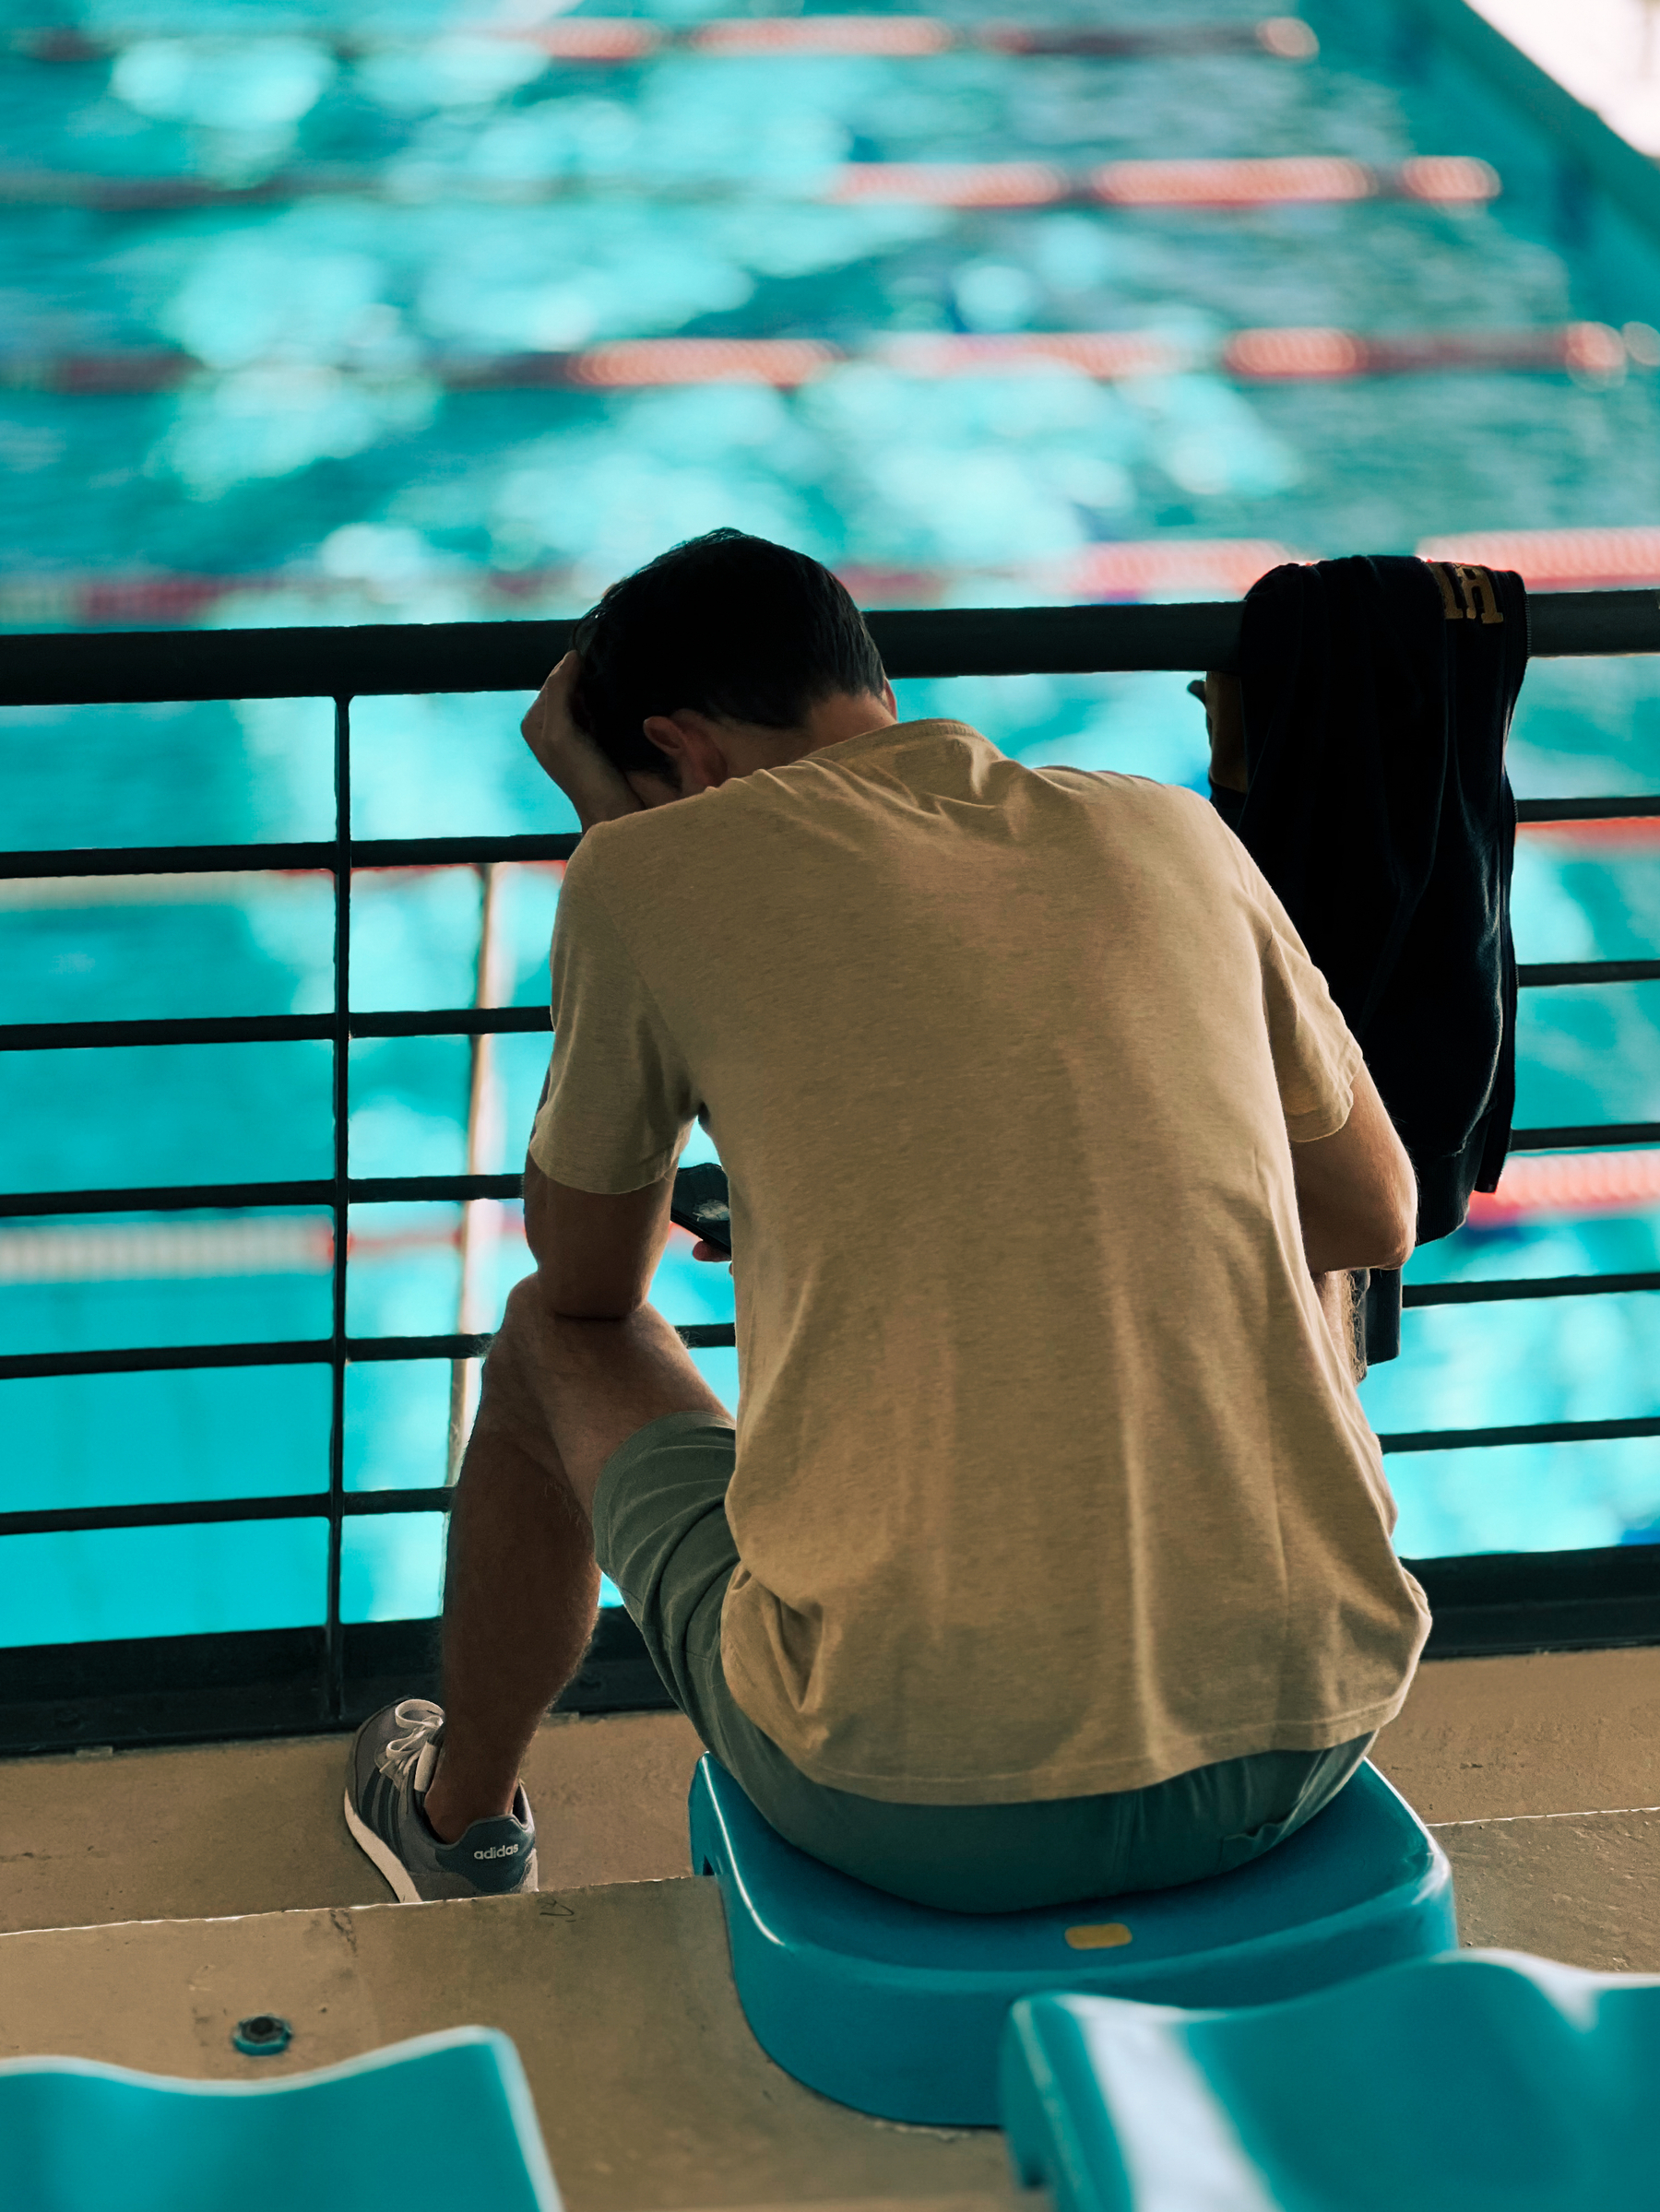 A man looks at his phone, with a swimming pool in the background.